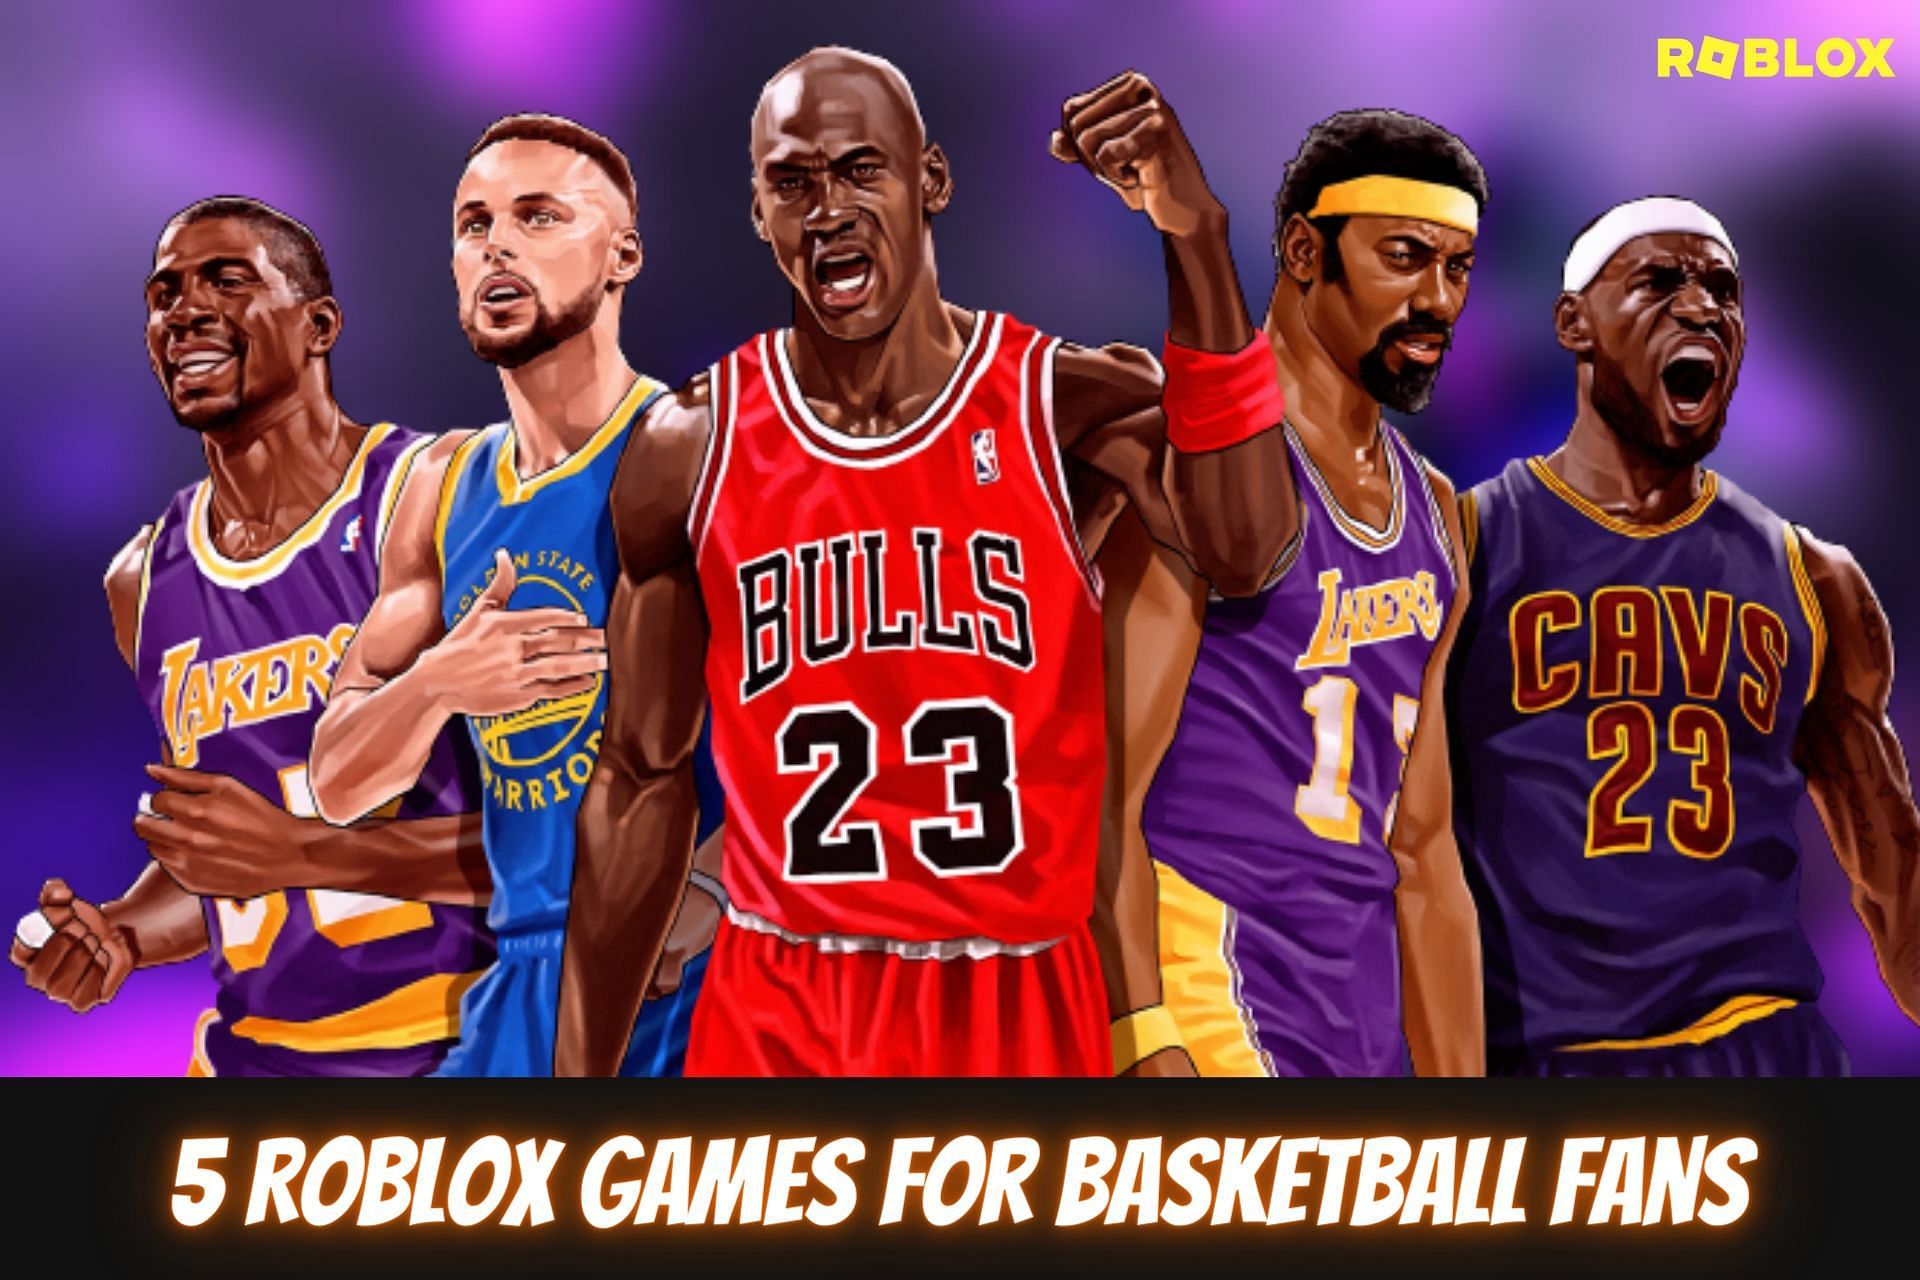 5 Roblox games for basketball fans